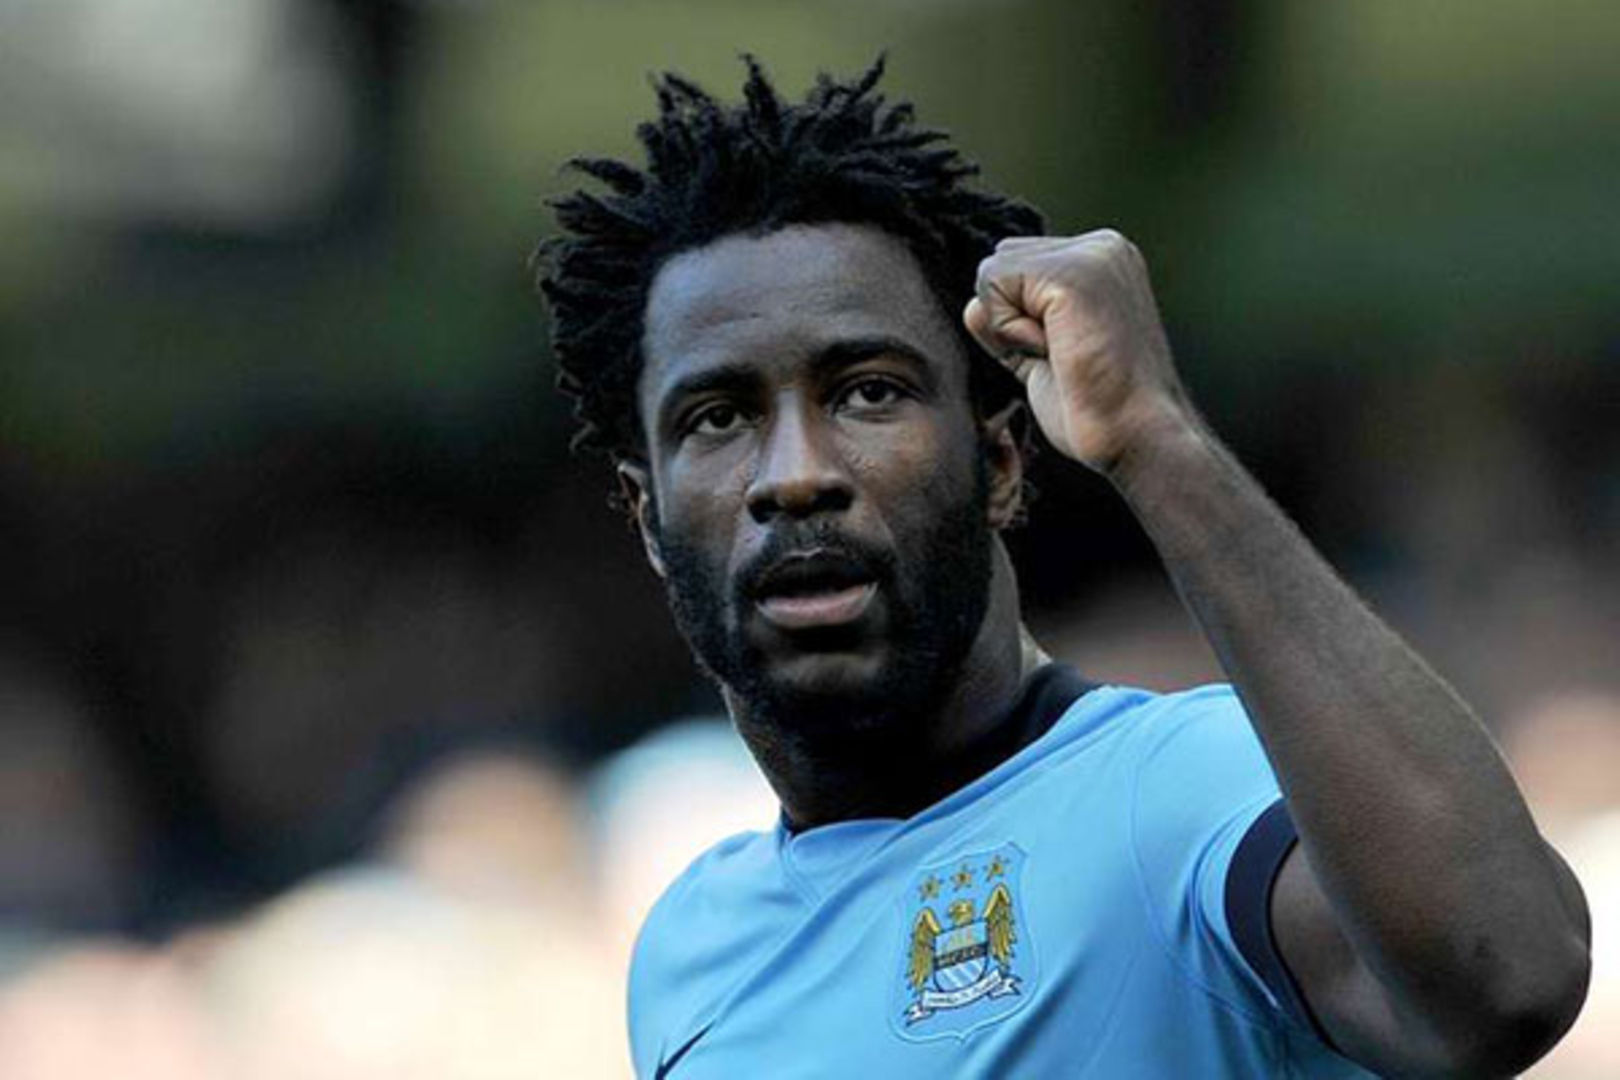 Bony promises to fill the void in Aguero's absence